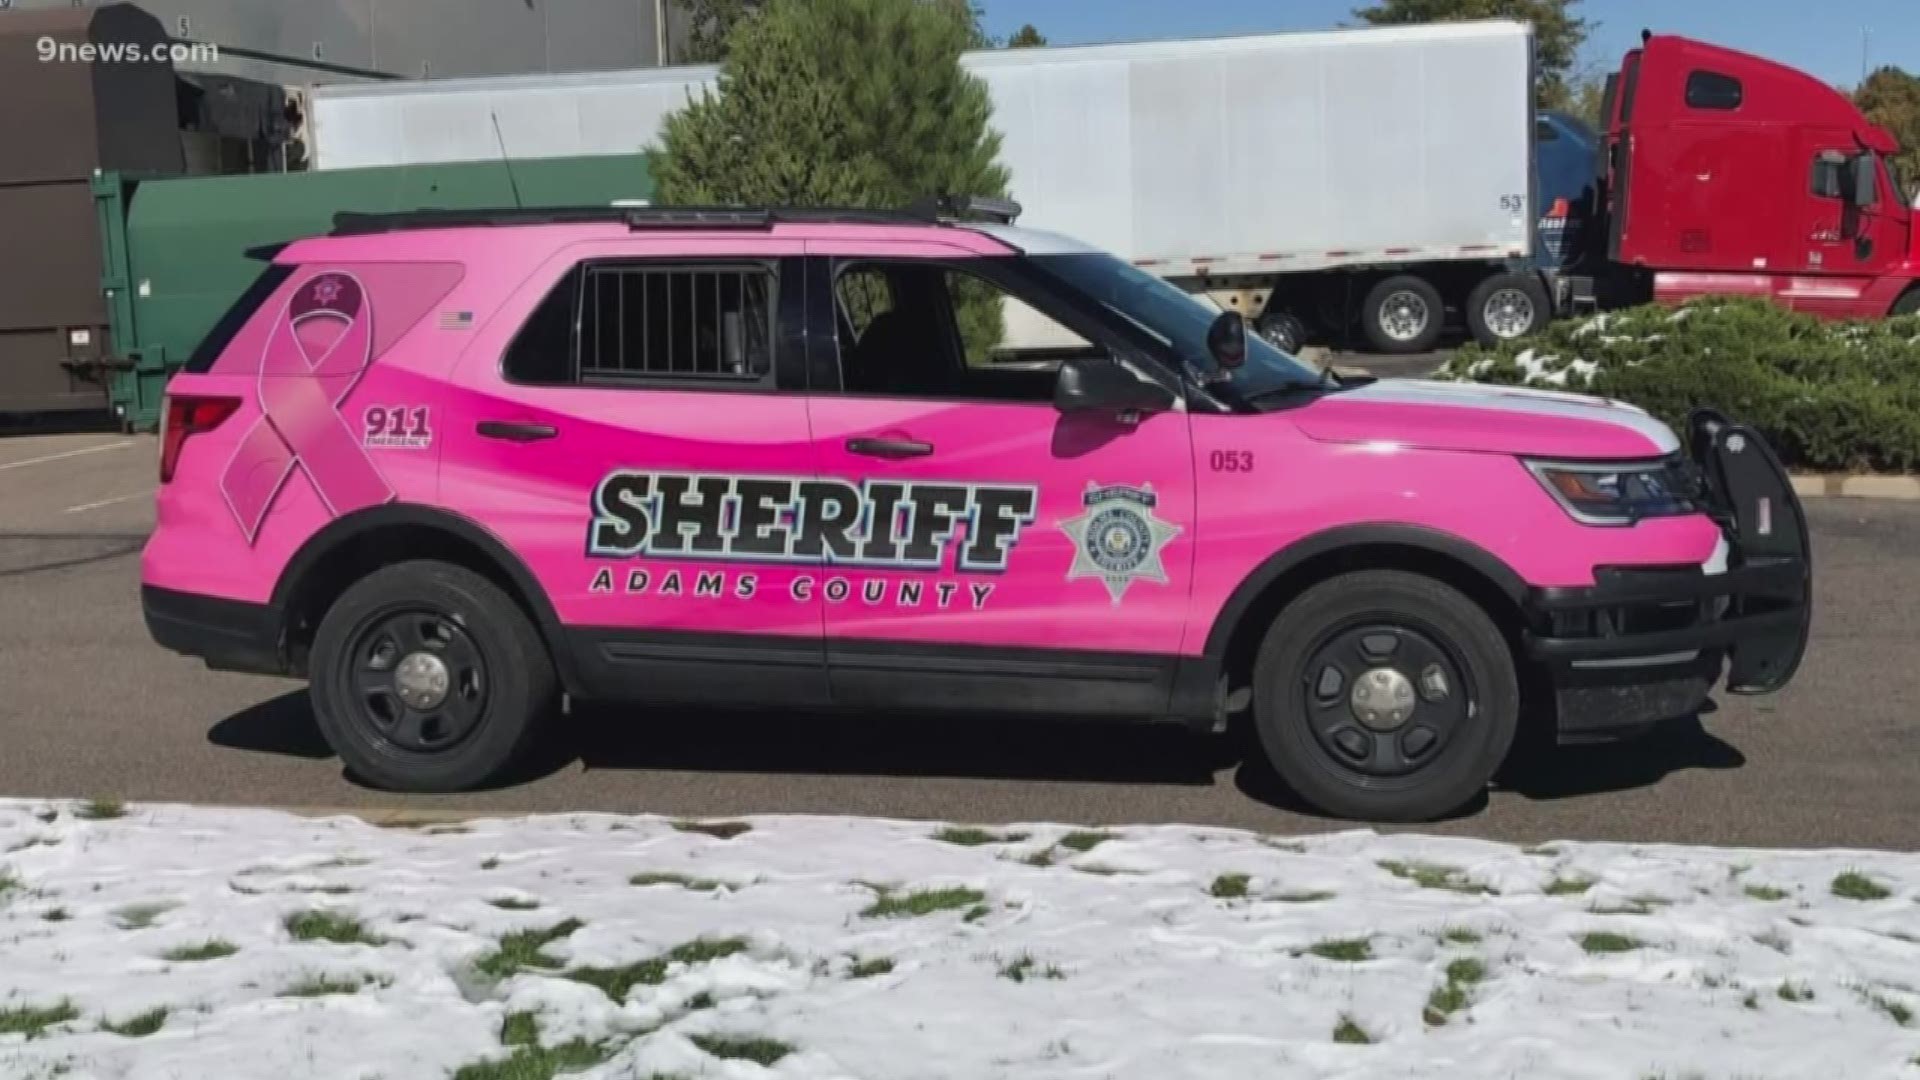 The Adams County Sheriff's Office said it wanted a way to honor breast cancer survivors.